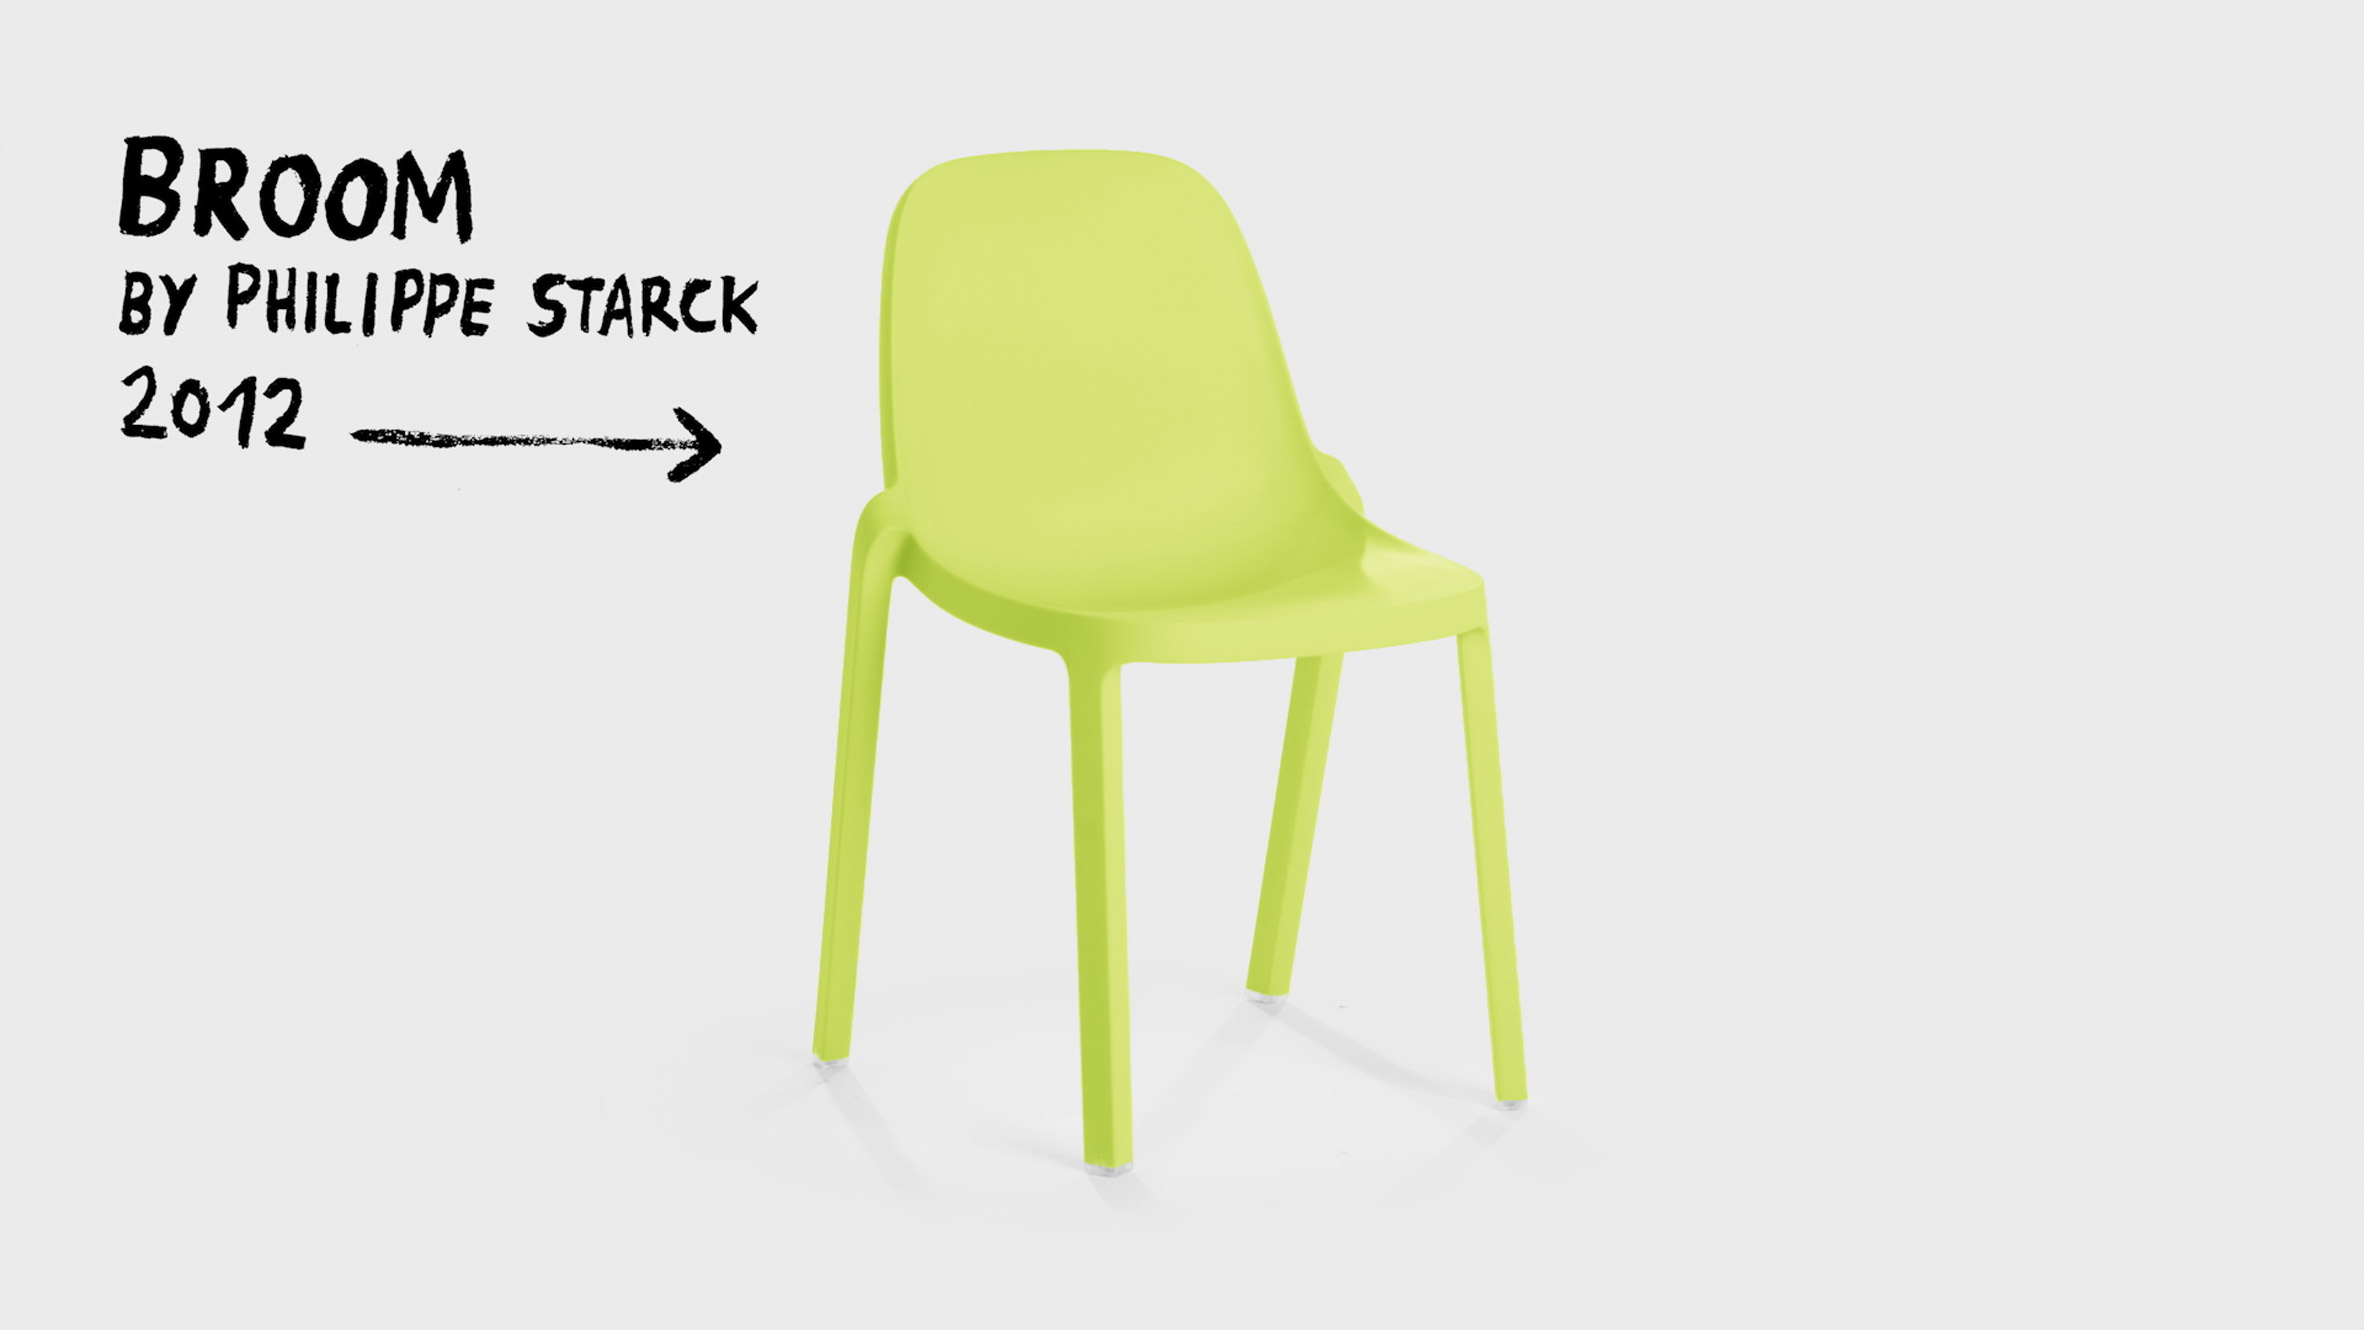 Broom by Philippe Starck for Emeco